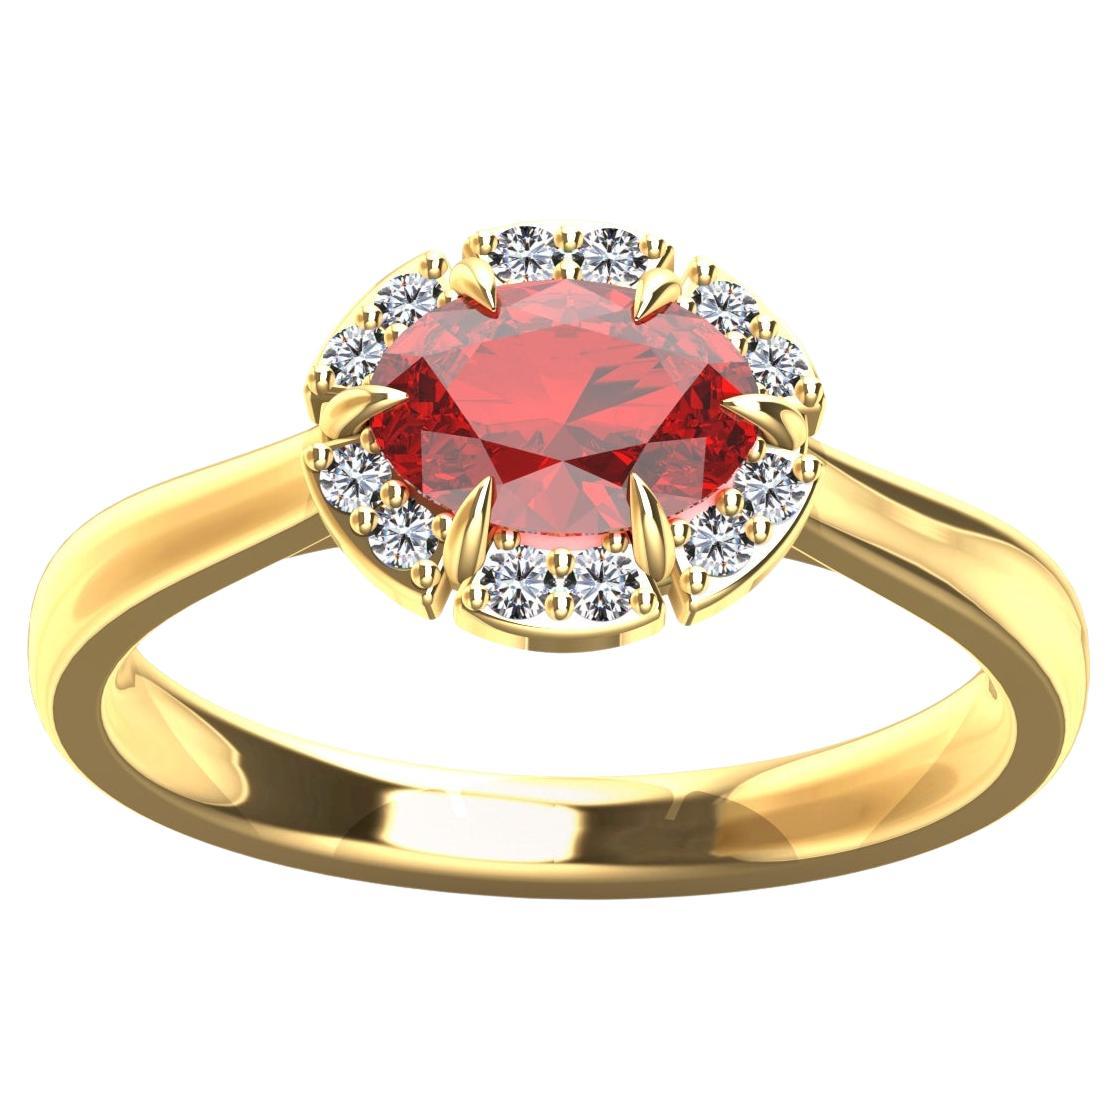 For Sale:  18 Karat Yellow Gold Art Deco Inspired Ruby Engagement Ring